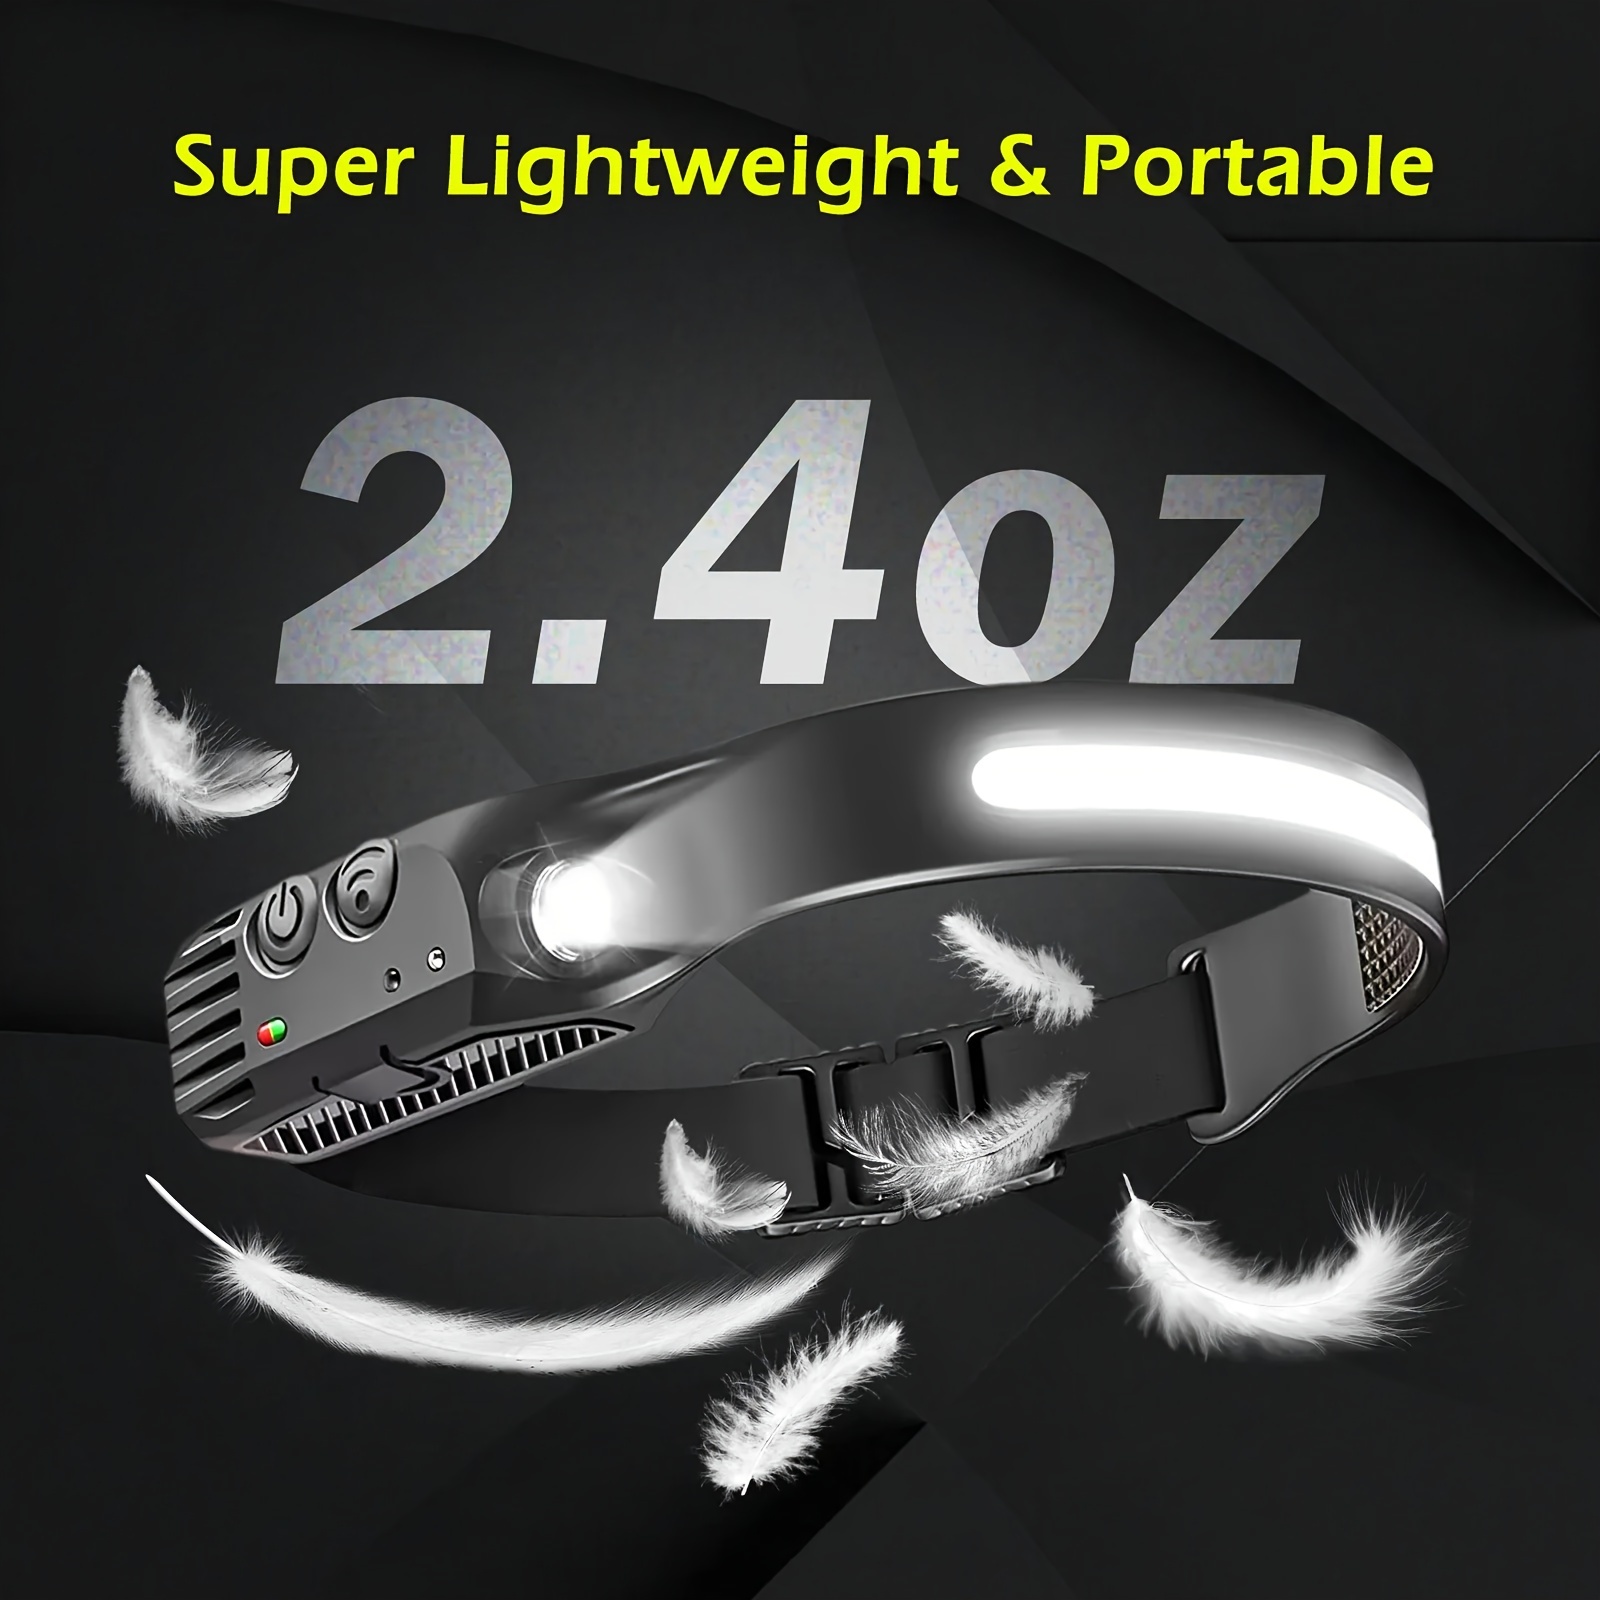 2 5pcs led sensor headlamps usb rechargeable 18650 built in battery powerful headlight for outdoor camping fishing details 7